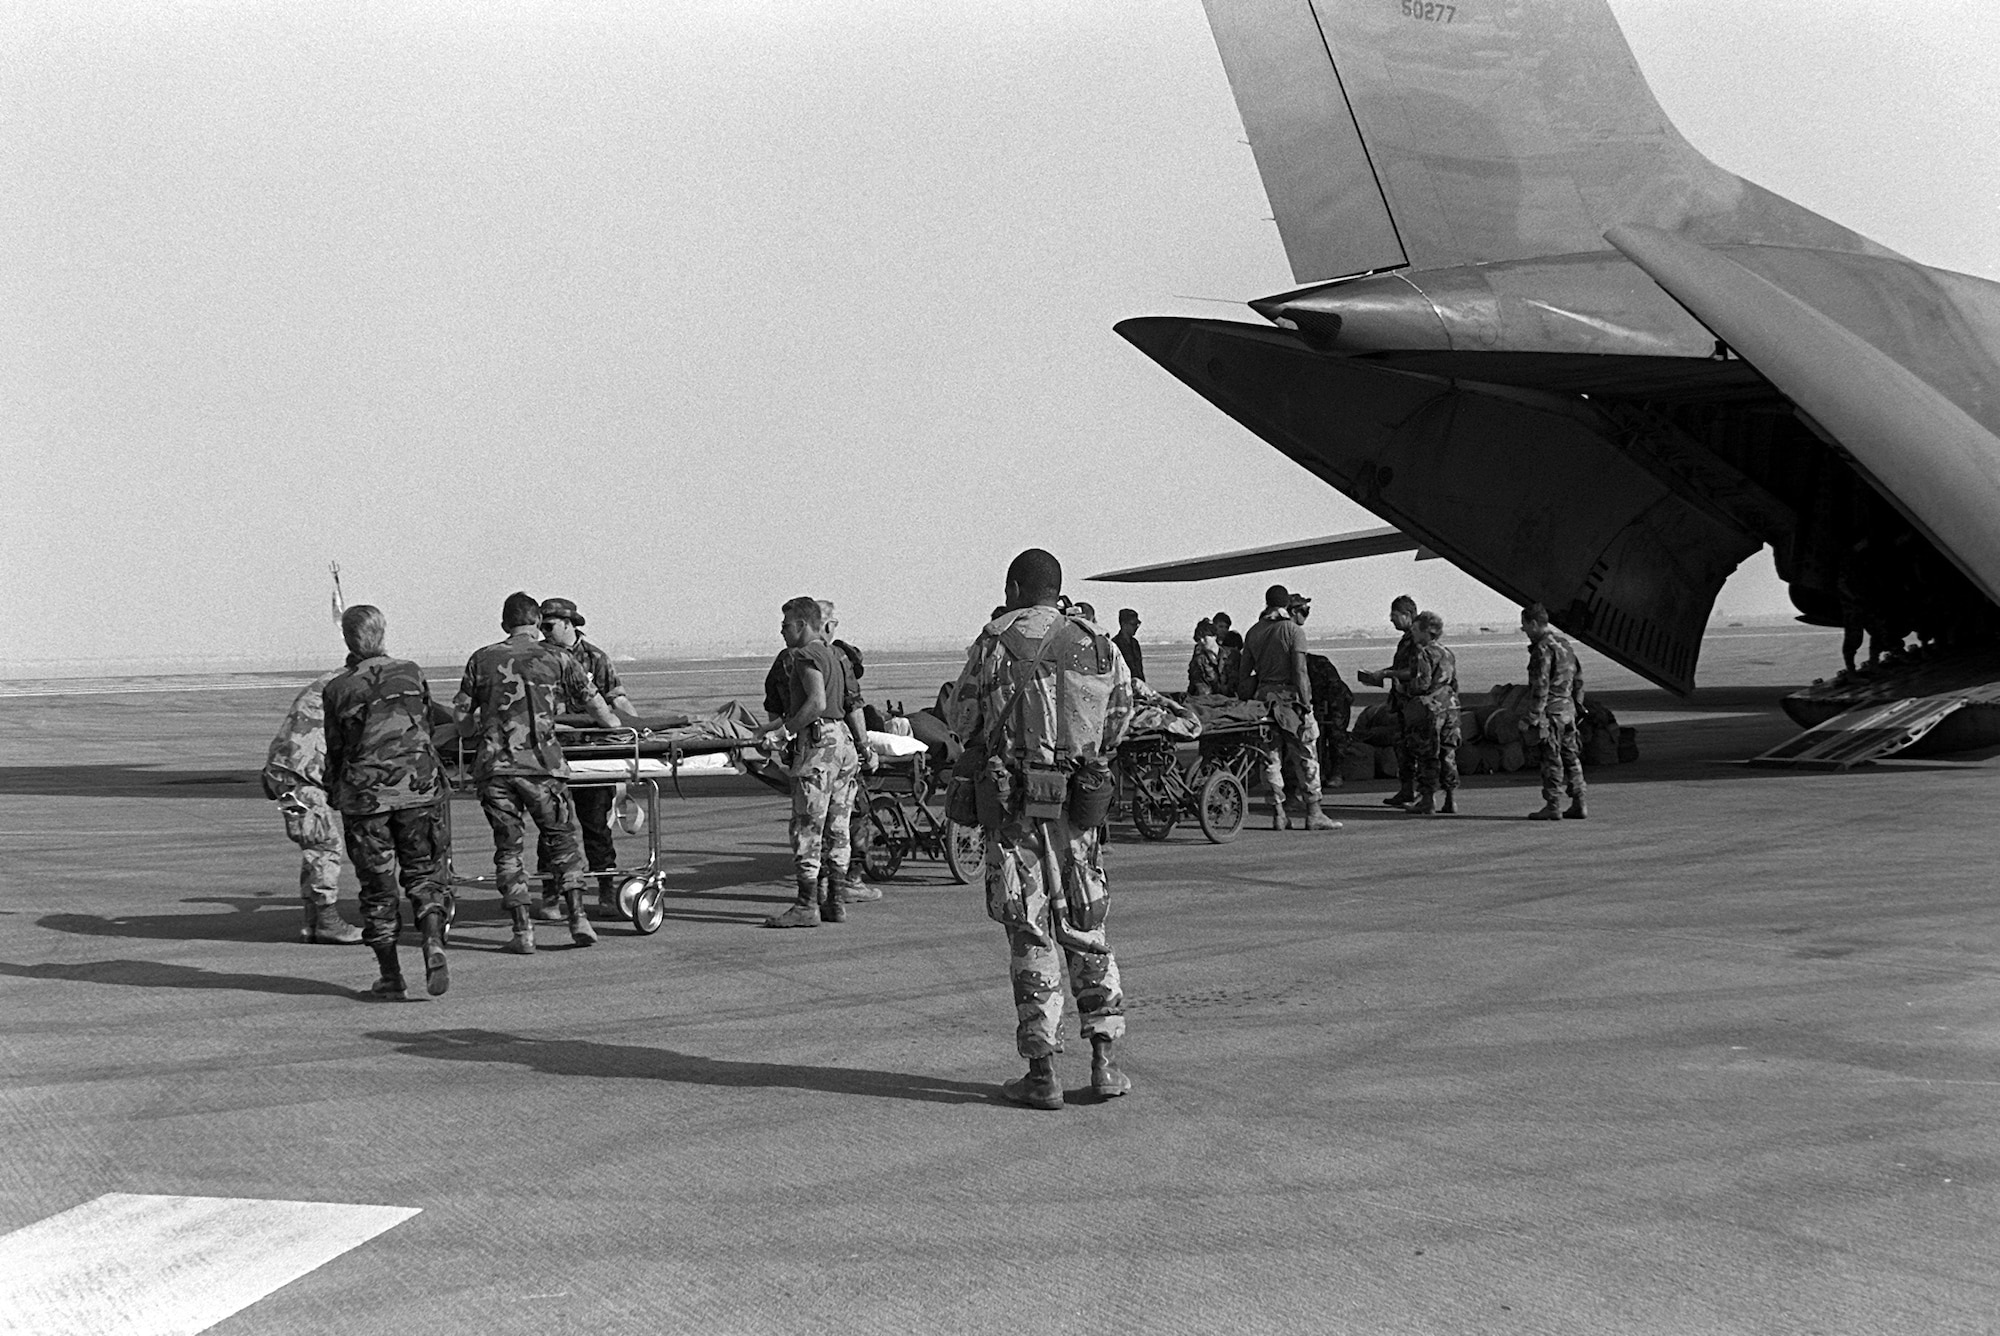 Medical personnel use litters to transport Cpl. Richard Ramirez, 1st Marine Division, and other wounded to a C-141B Starlifter aircraft. The patients are being medically evacuated from Al-Jubayl Air Base to Germany for treatment of wounds received during Operation Desert Storm.